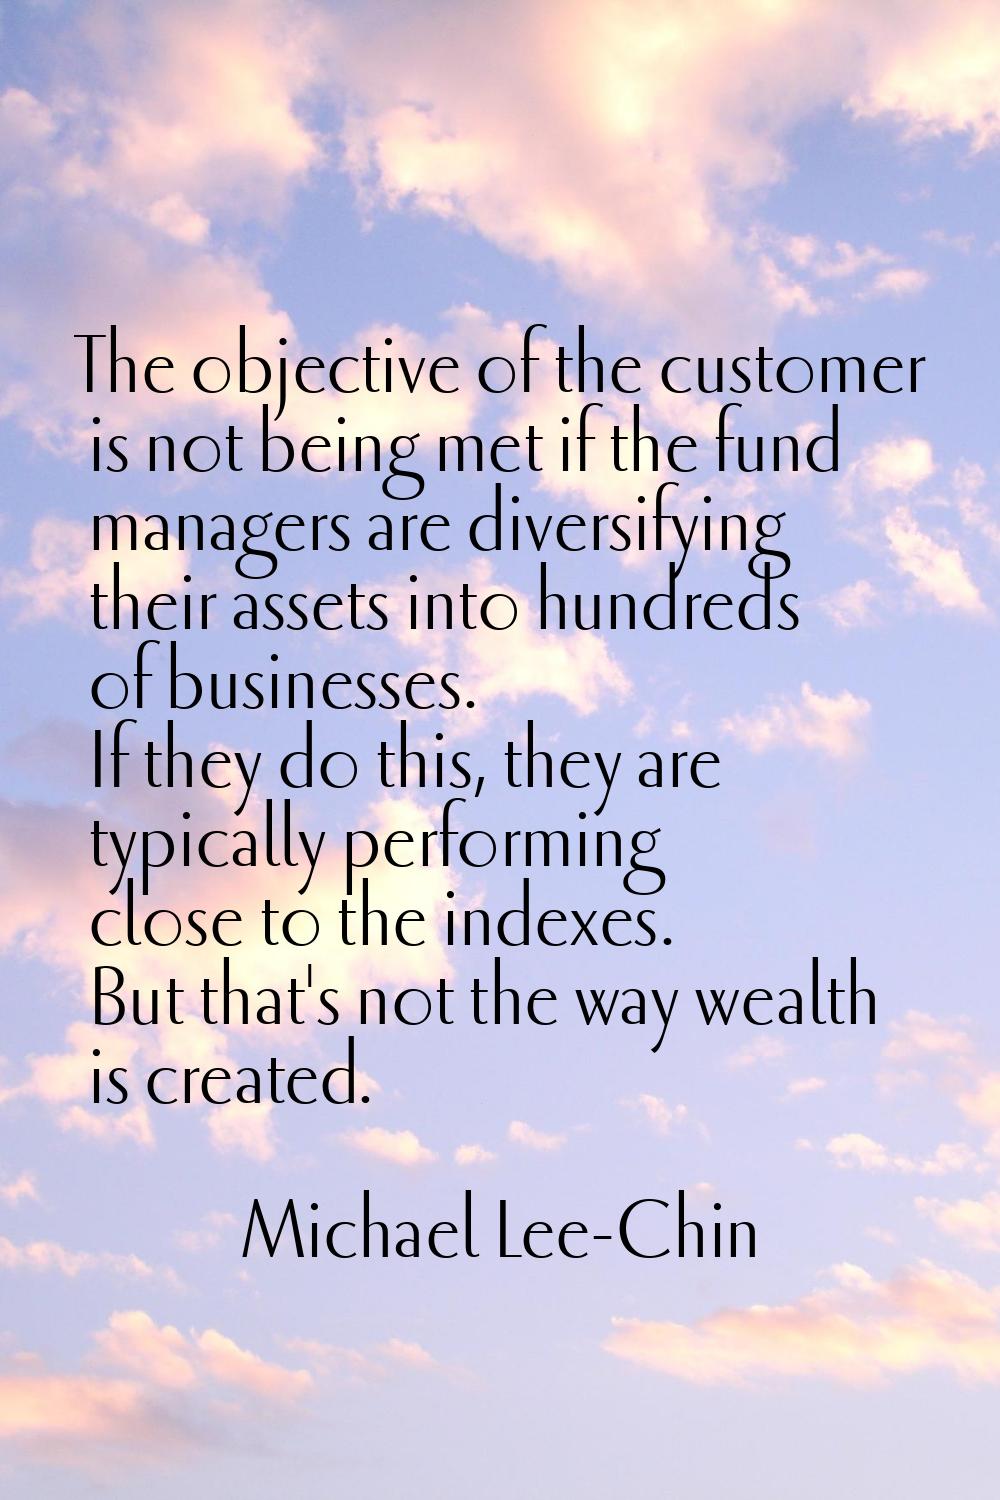 The objective of the customer is not being met if the fund managers are diversifying their assets i